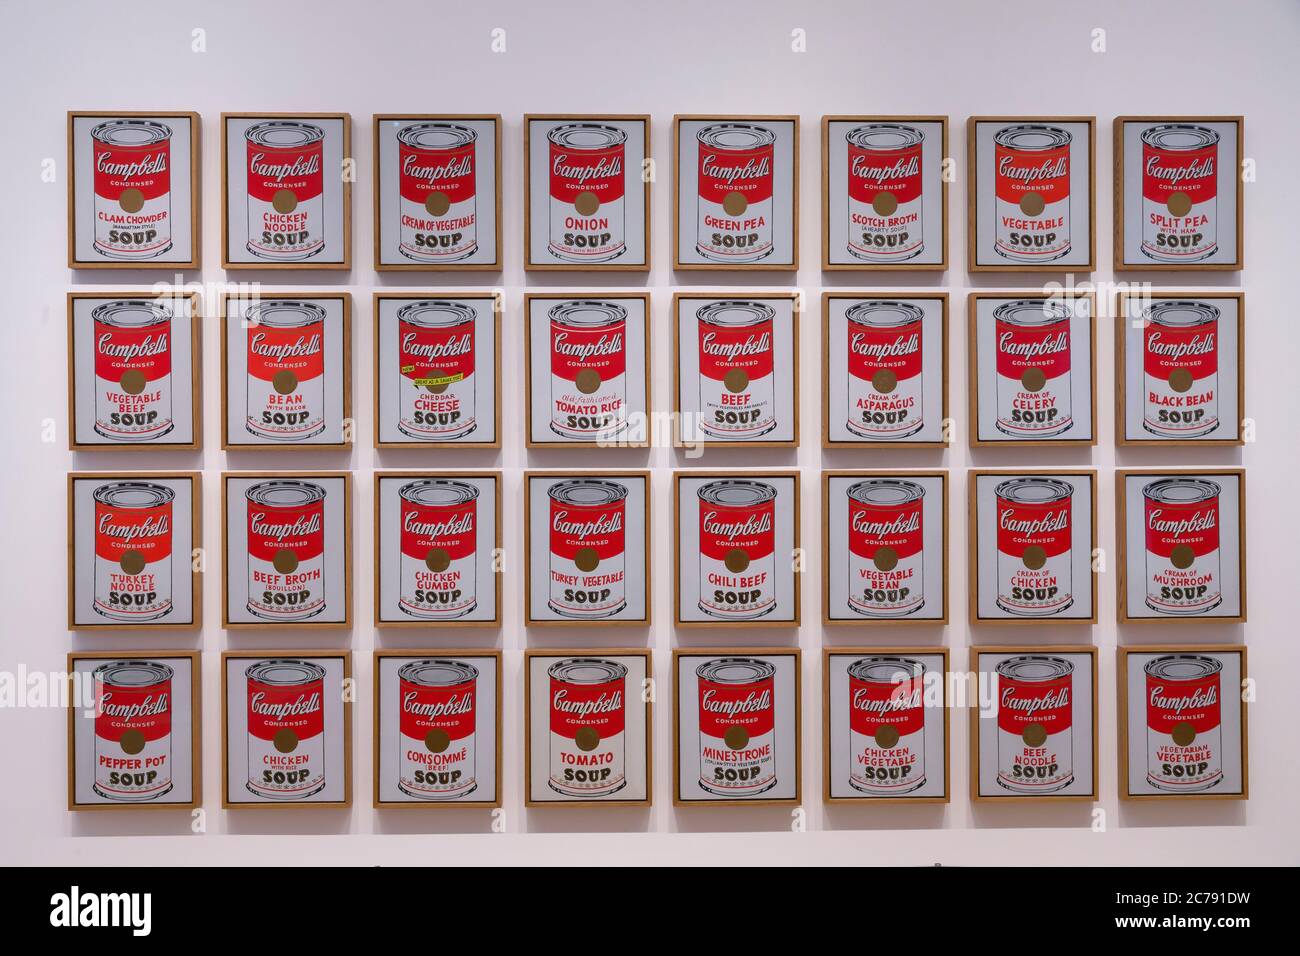 Campbell's Soup Cans, Andy Warhol, 1962, Stockfoto